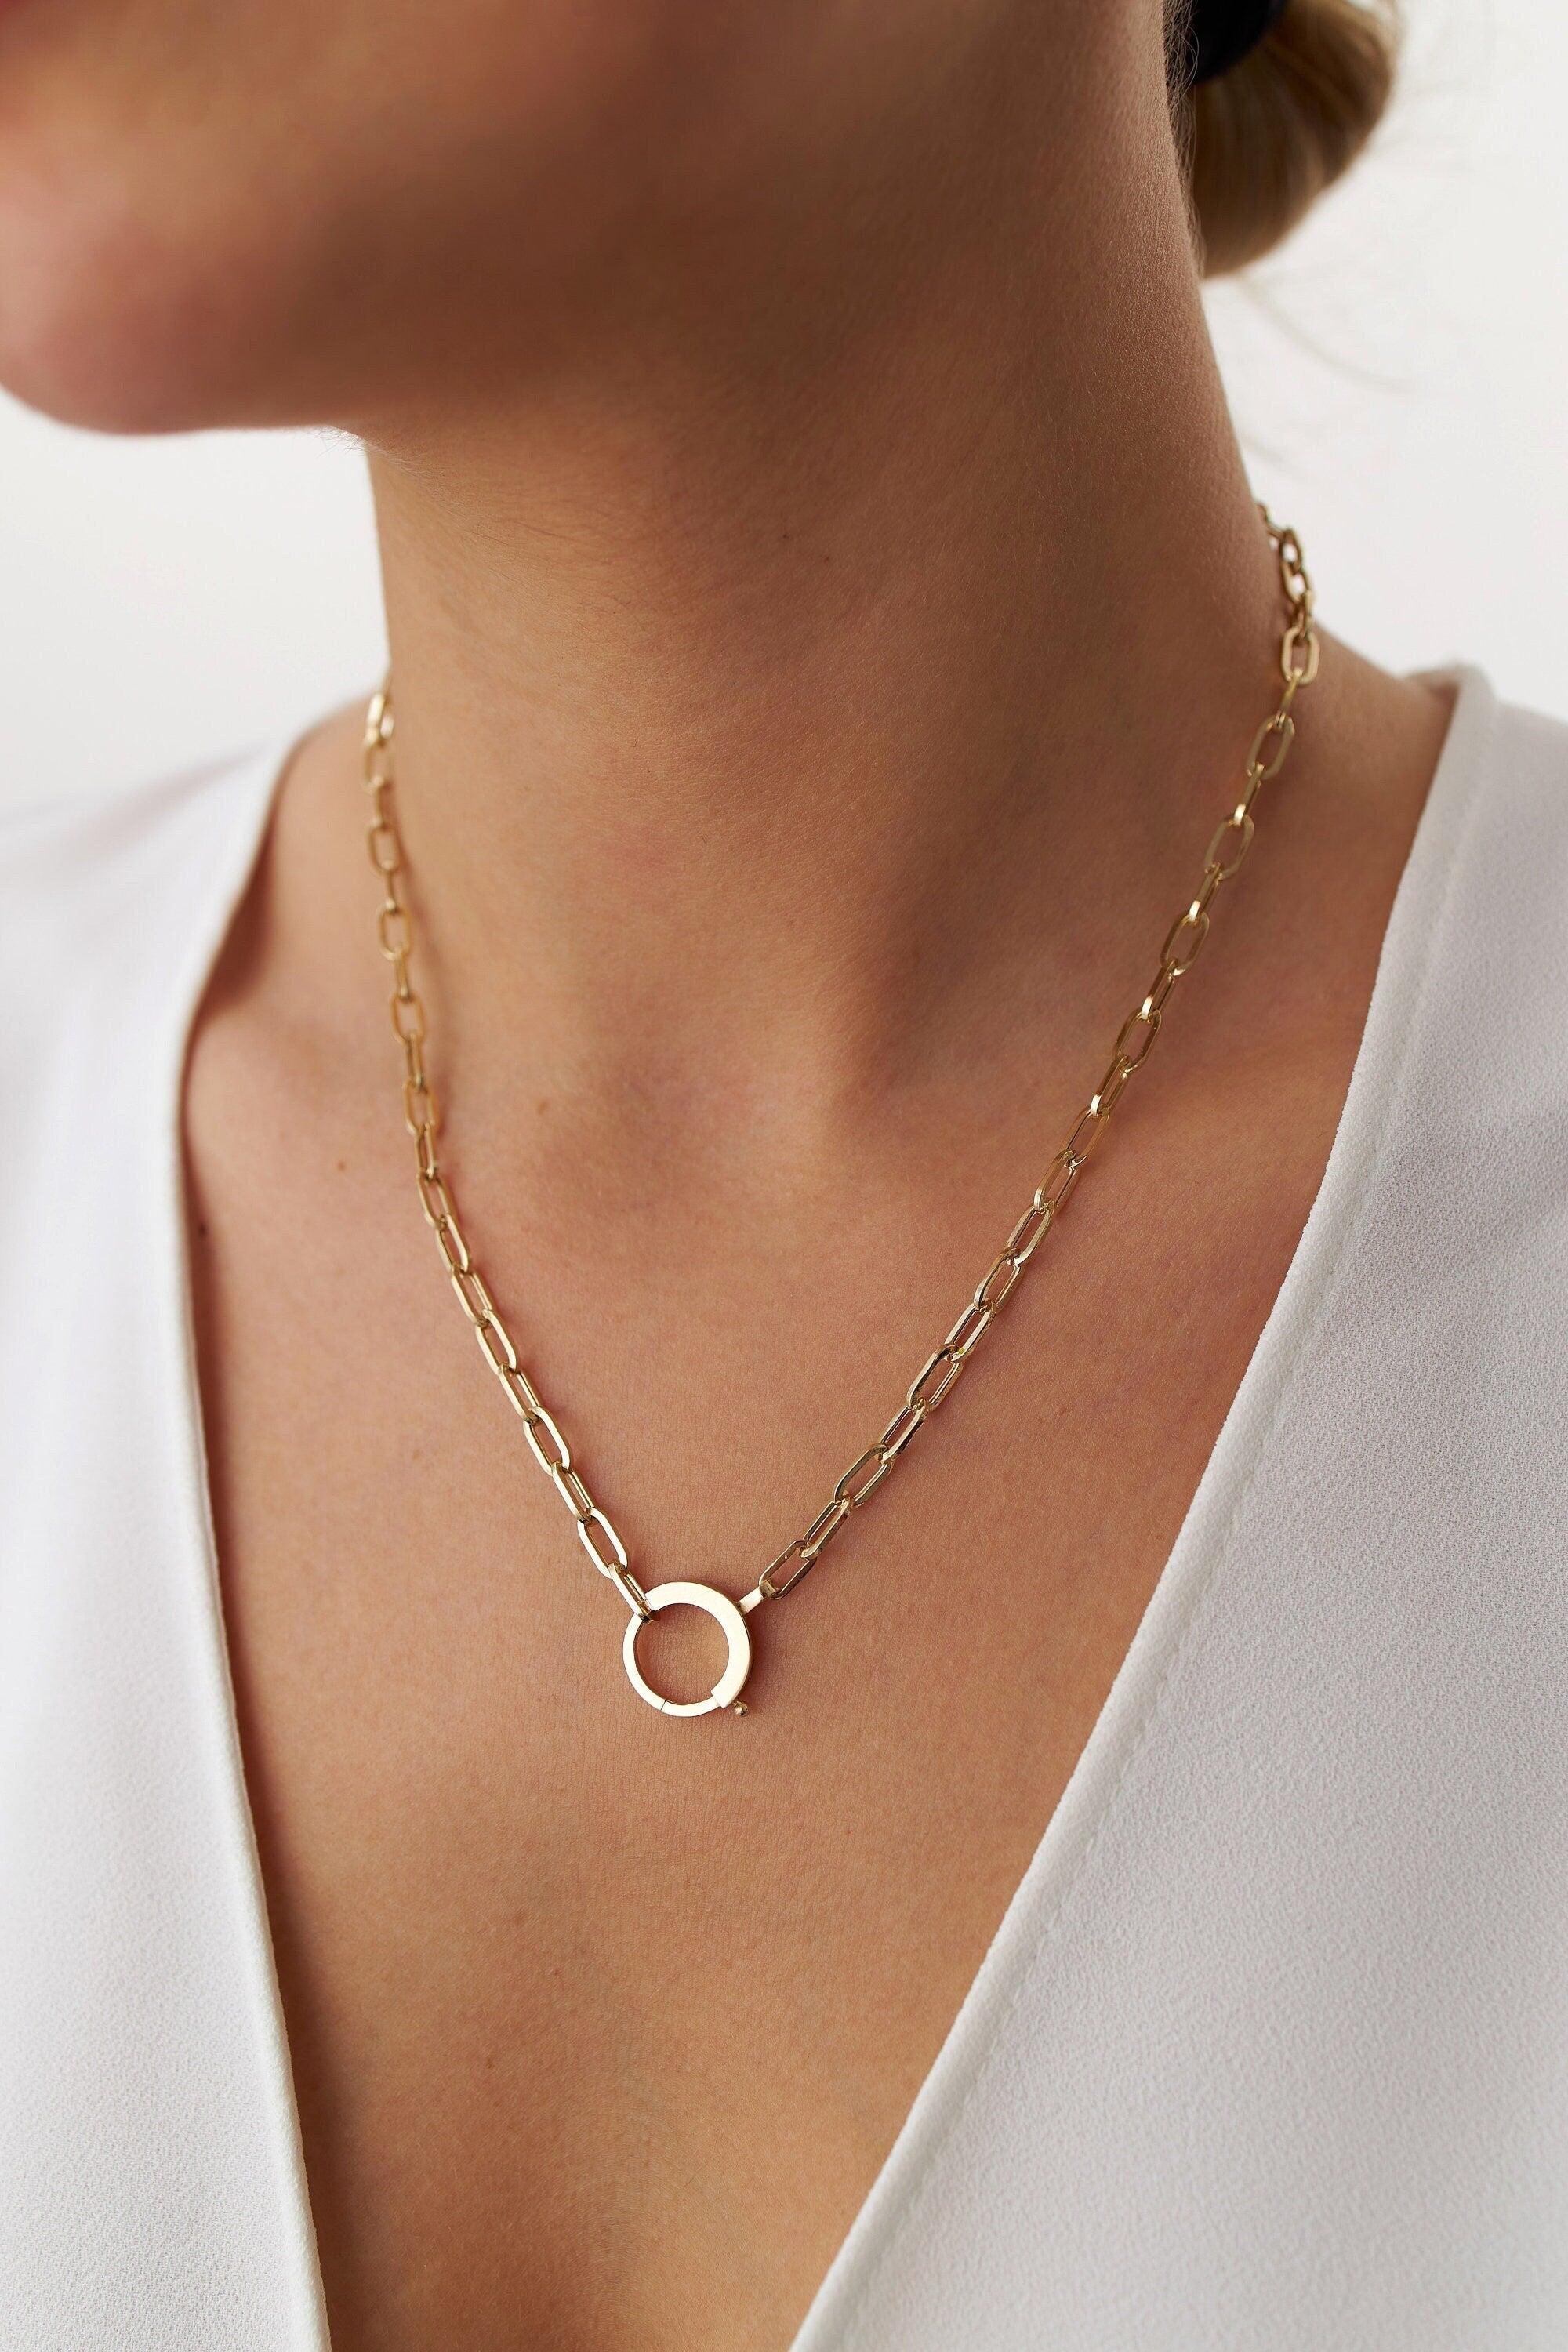 Lock Necklace in 14K Gold